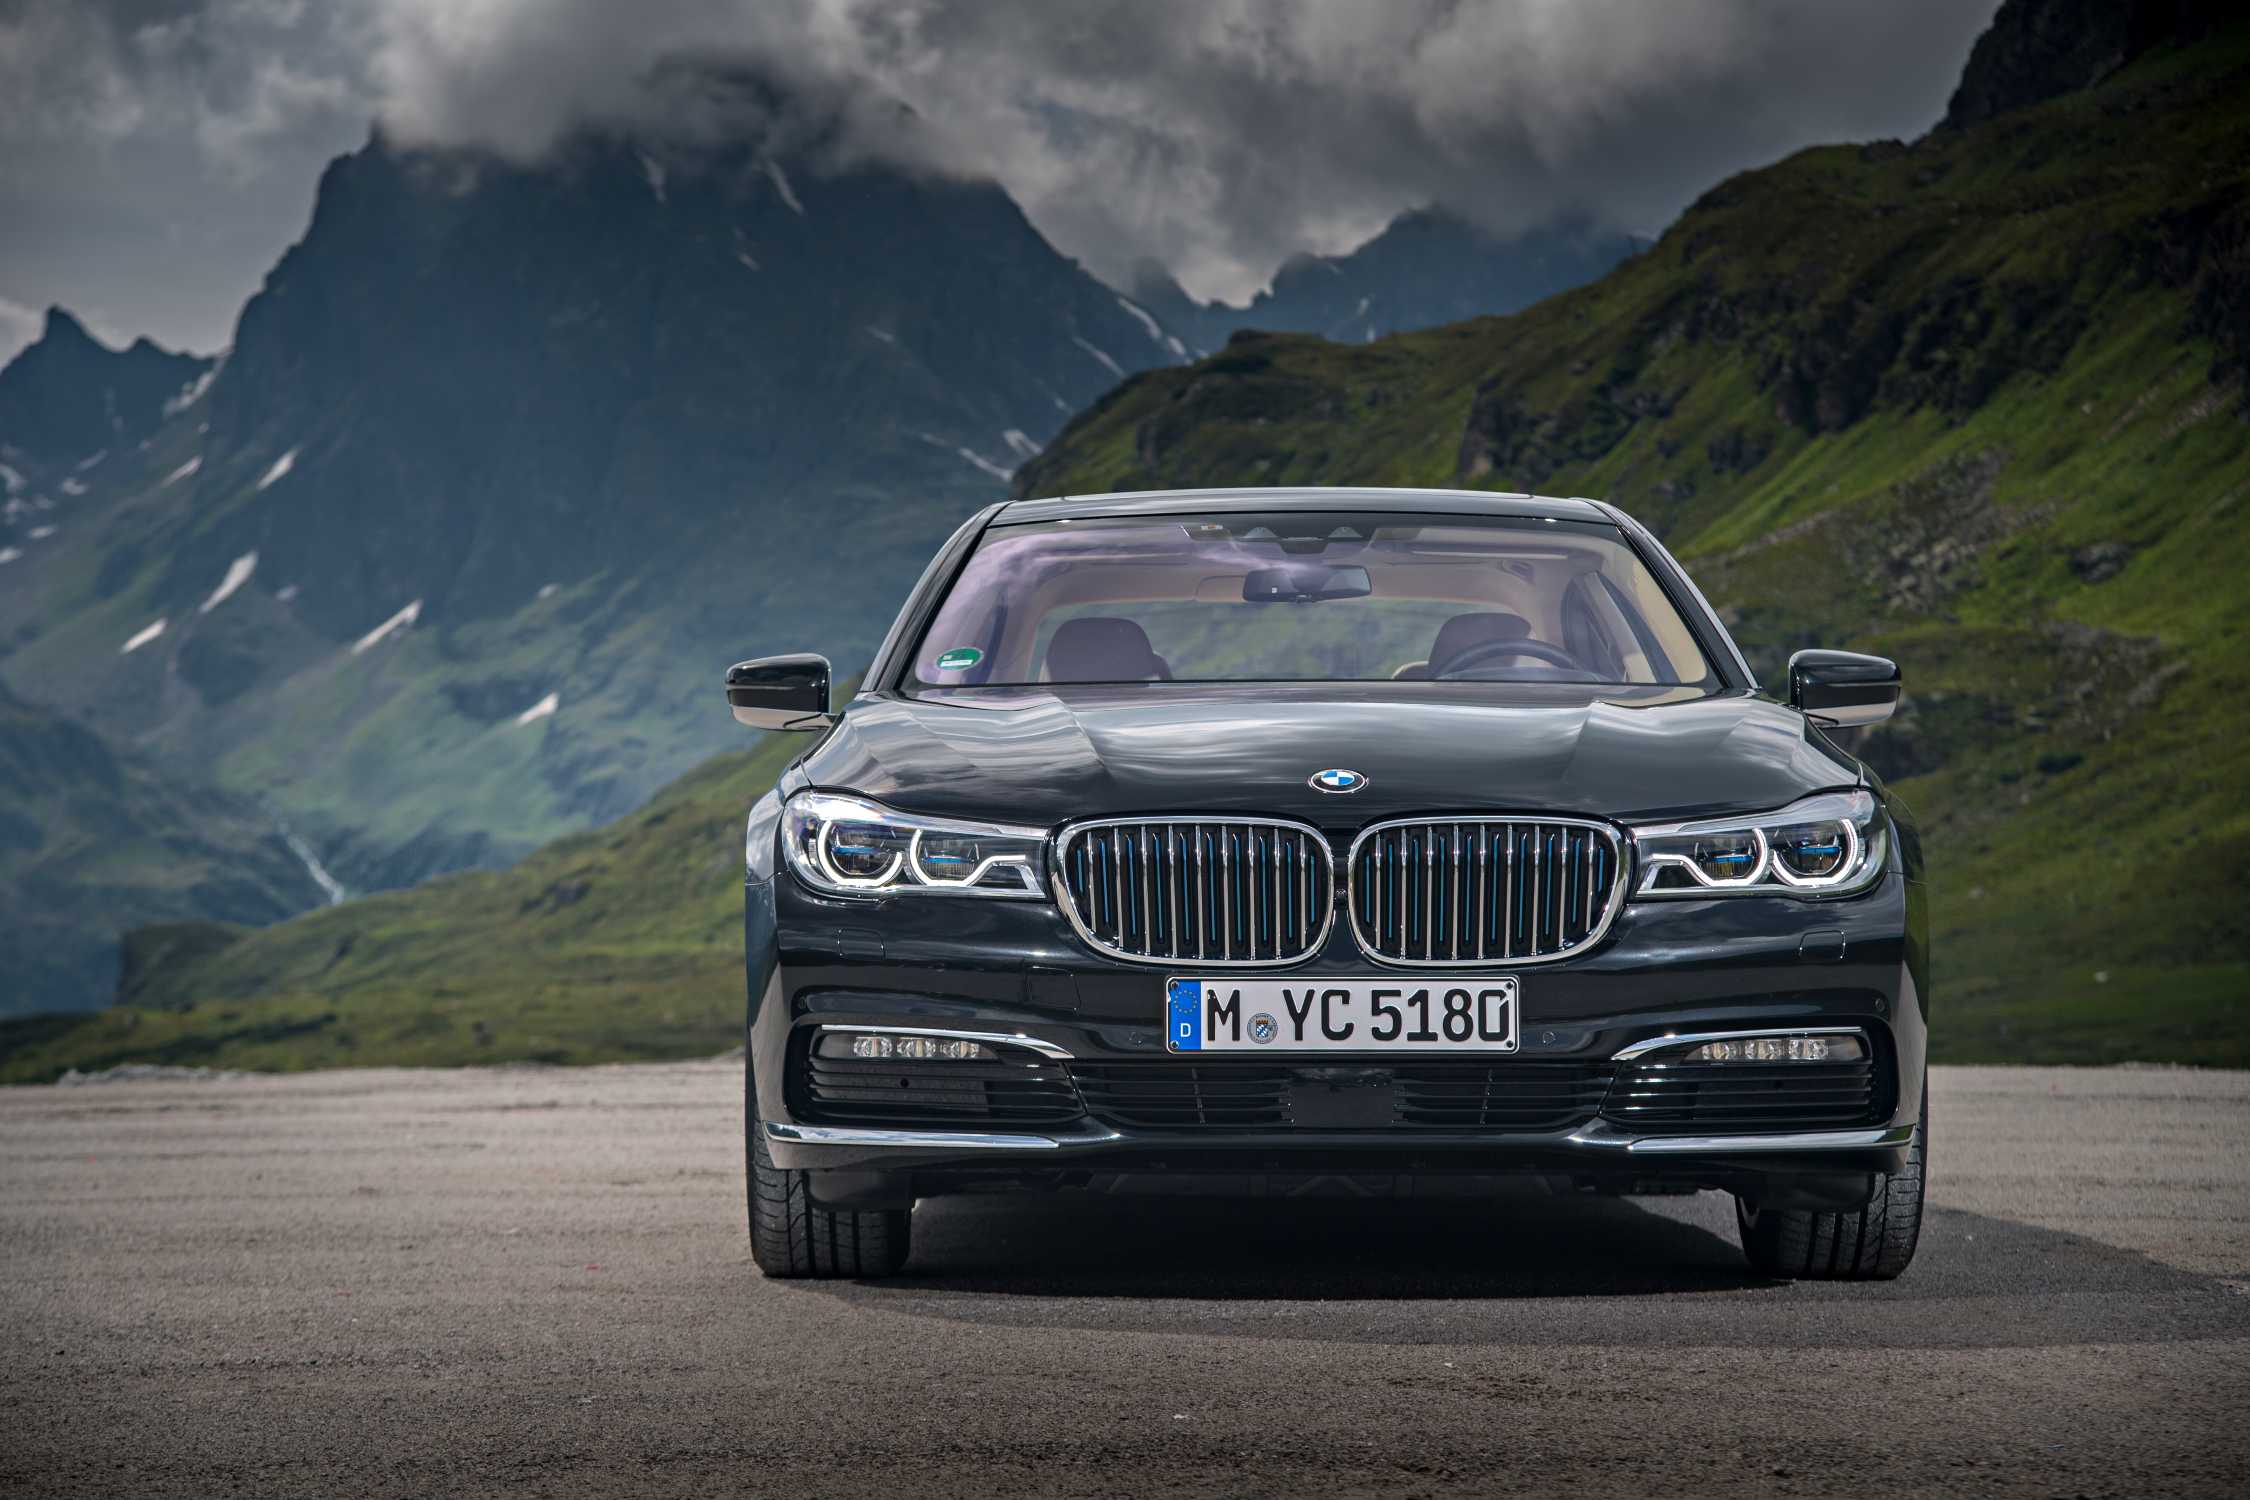 The New 2017 BMW 740e xDrive iPerformance – BMW eDrive Technology And  Carbon Core Body Structure Derived From The Development Of BMW i Models.